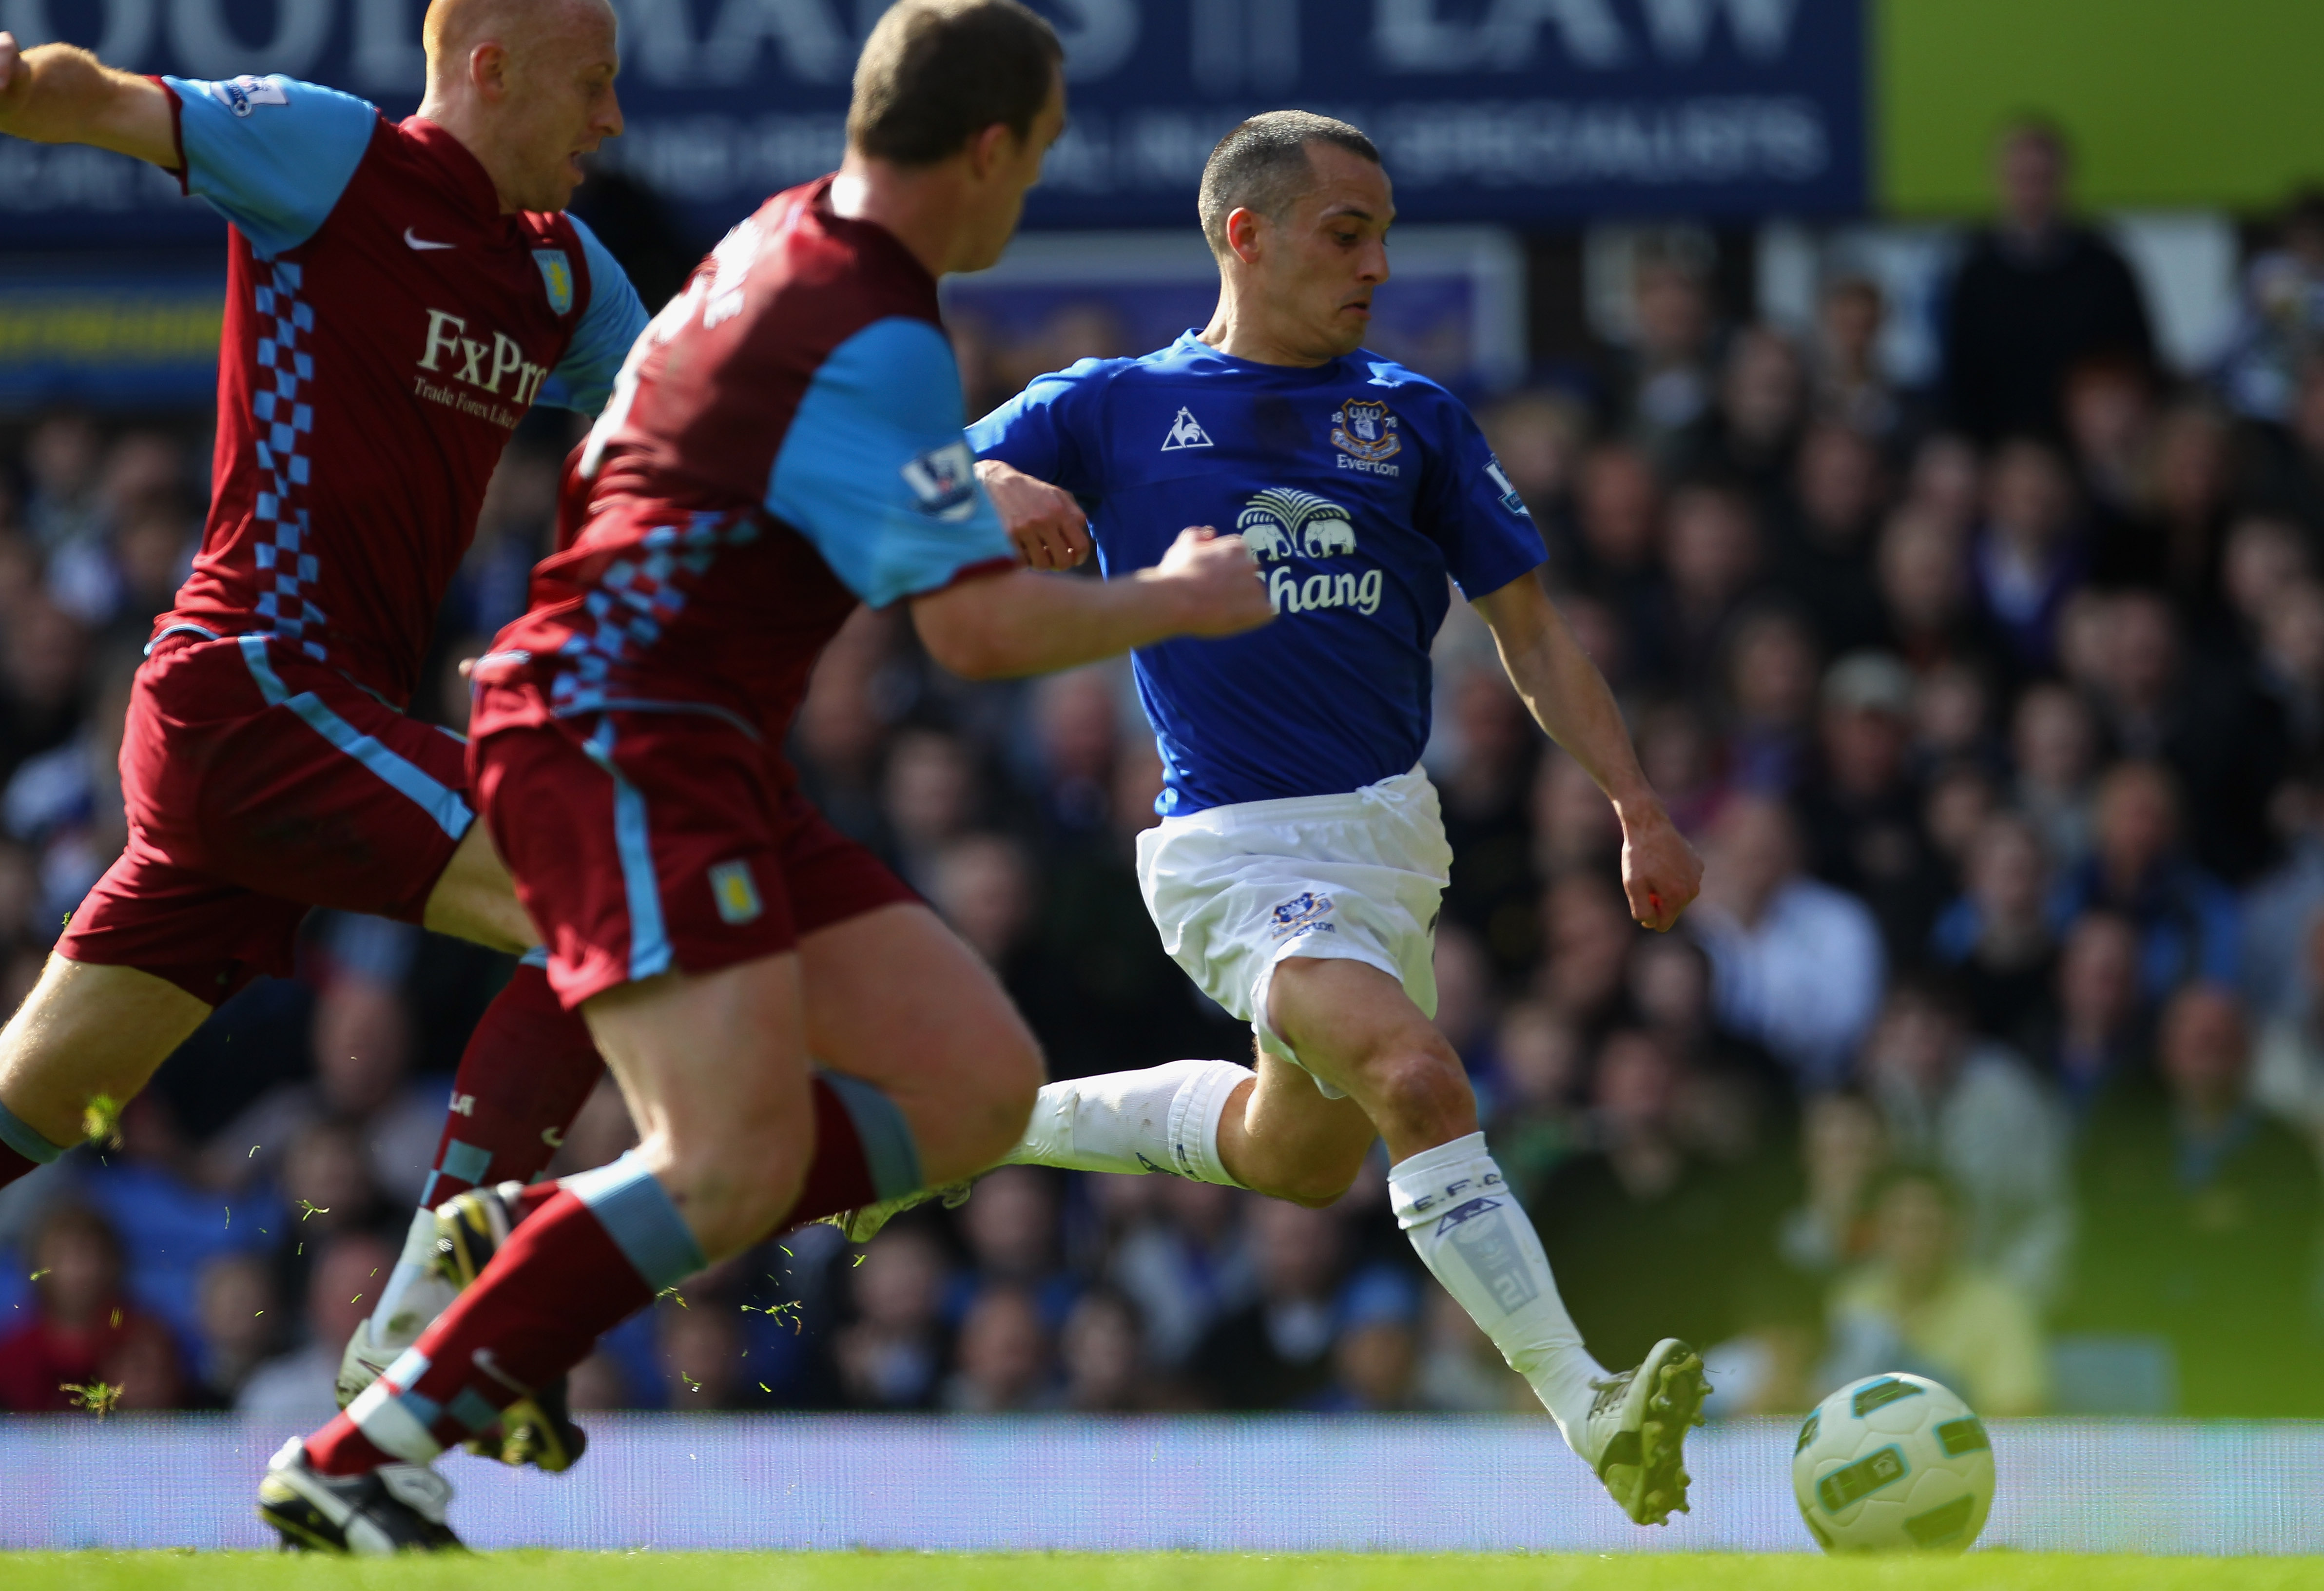 LIVERPOOL, ENGLAND - APRIL 02:  Leon Osman of Everton scores the opening goal during the Barclays Premier League match between Everton and Aston Villa at Goodison Park on April 2, 2011 in Liverpool, England.  (Photo by Alex Livesey/Getty Images)